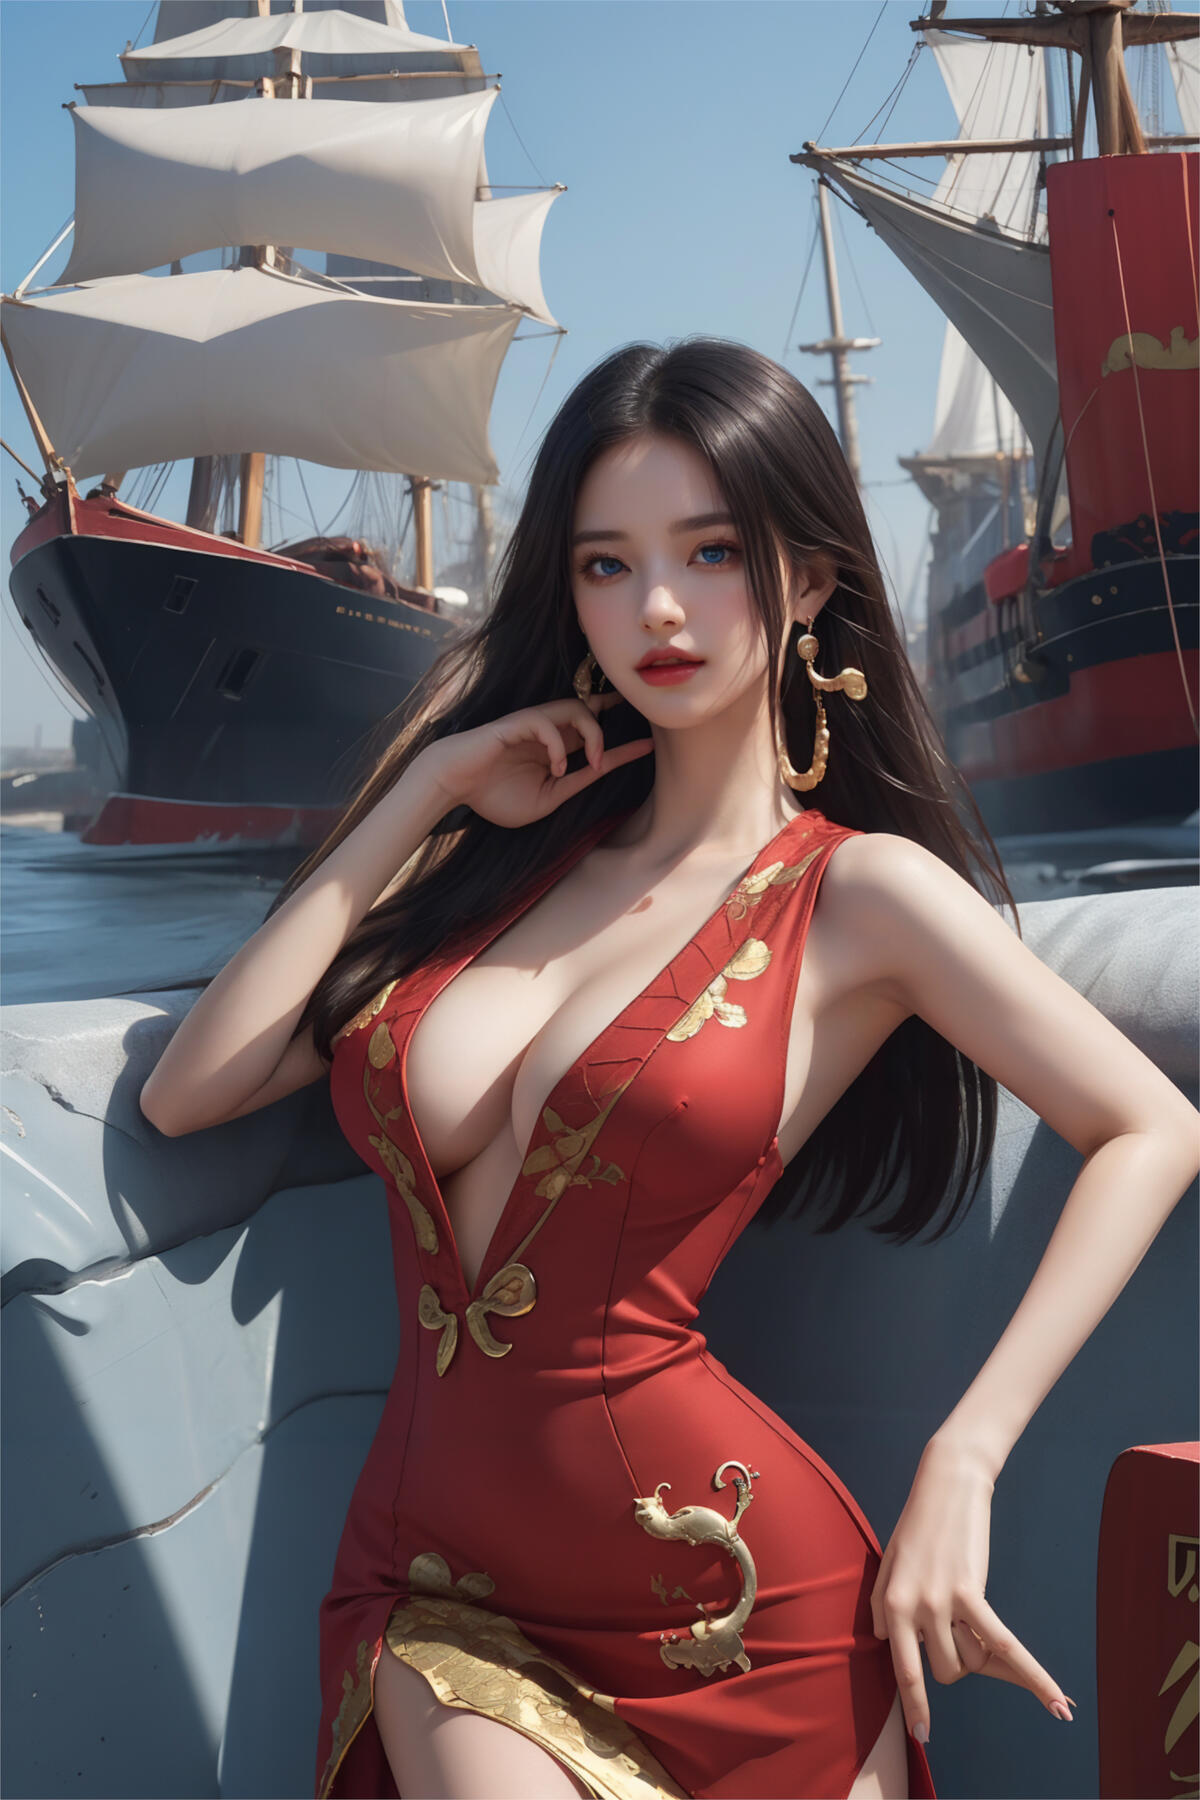 A drawing of a girl against a background of ships